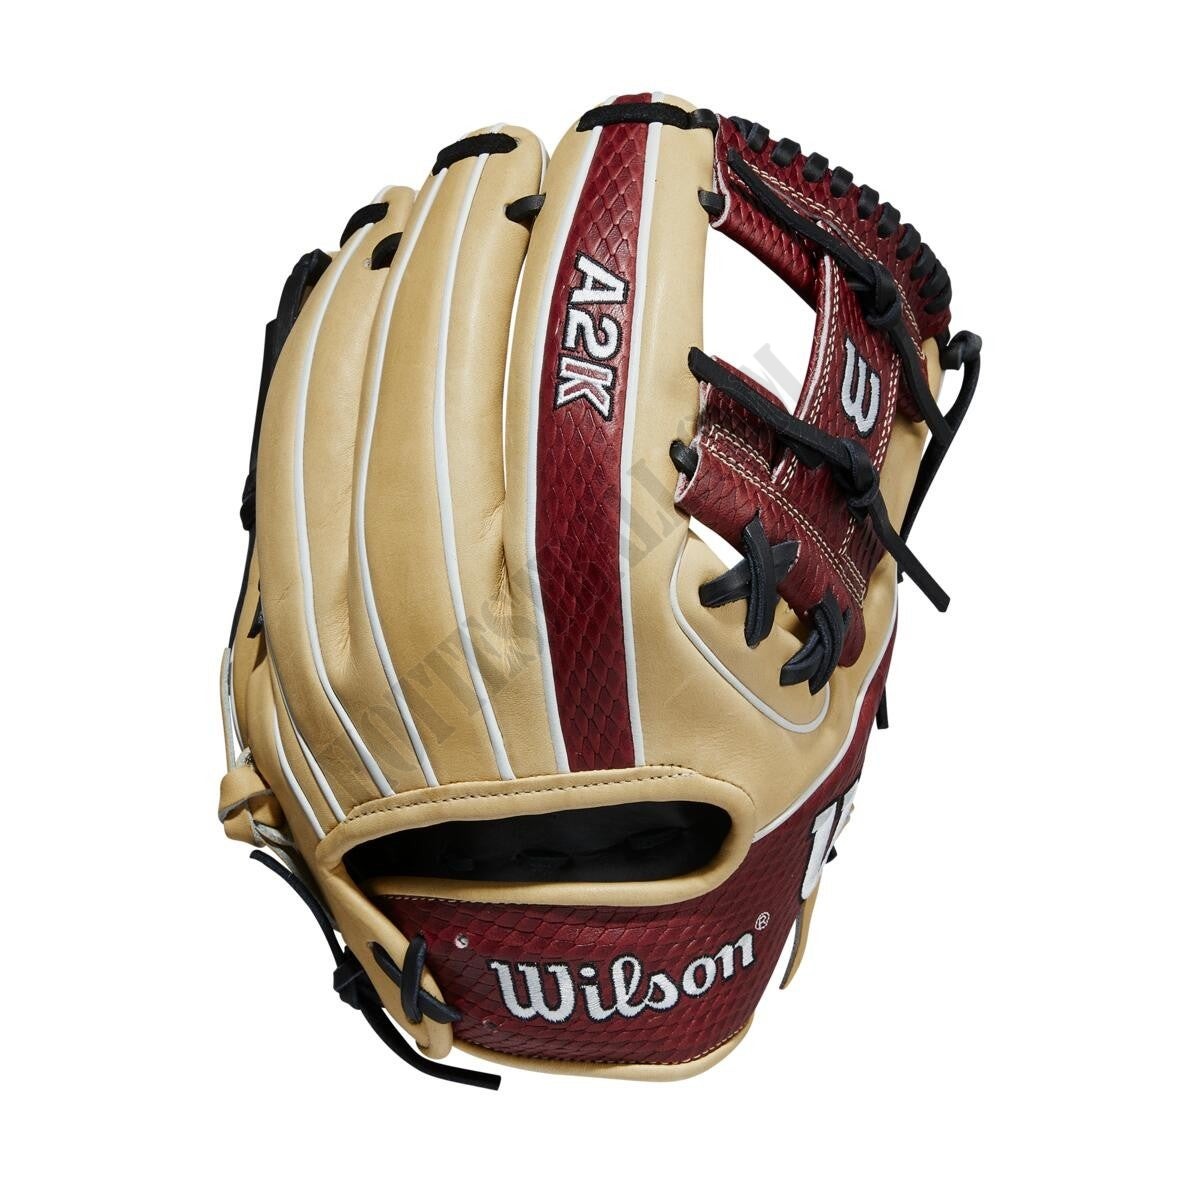 2021 A2K 1786 11.5" Infield Baseball Glove - Limited Edition ● Wilson Promotions - -1